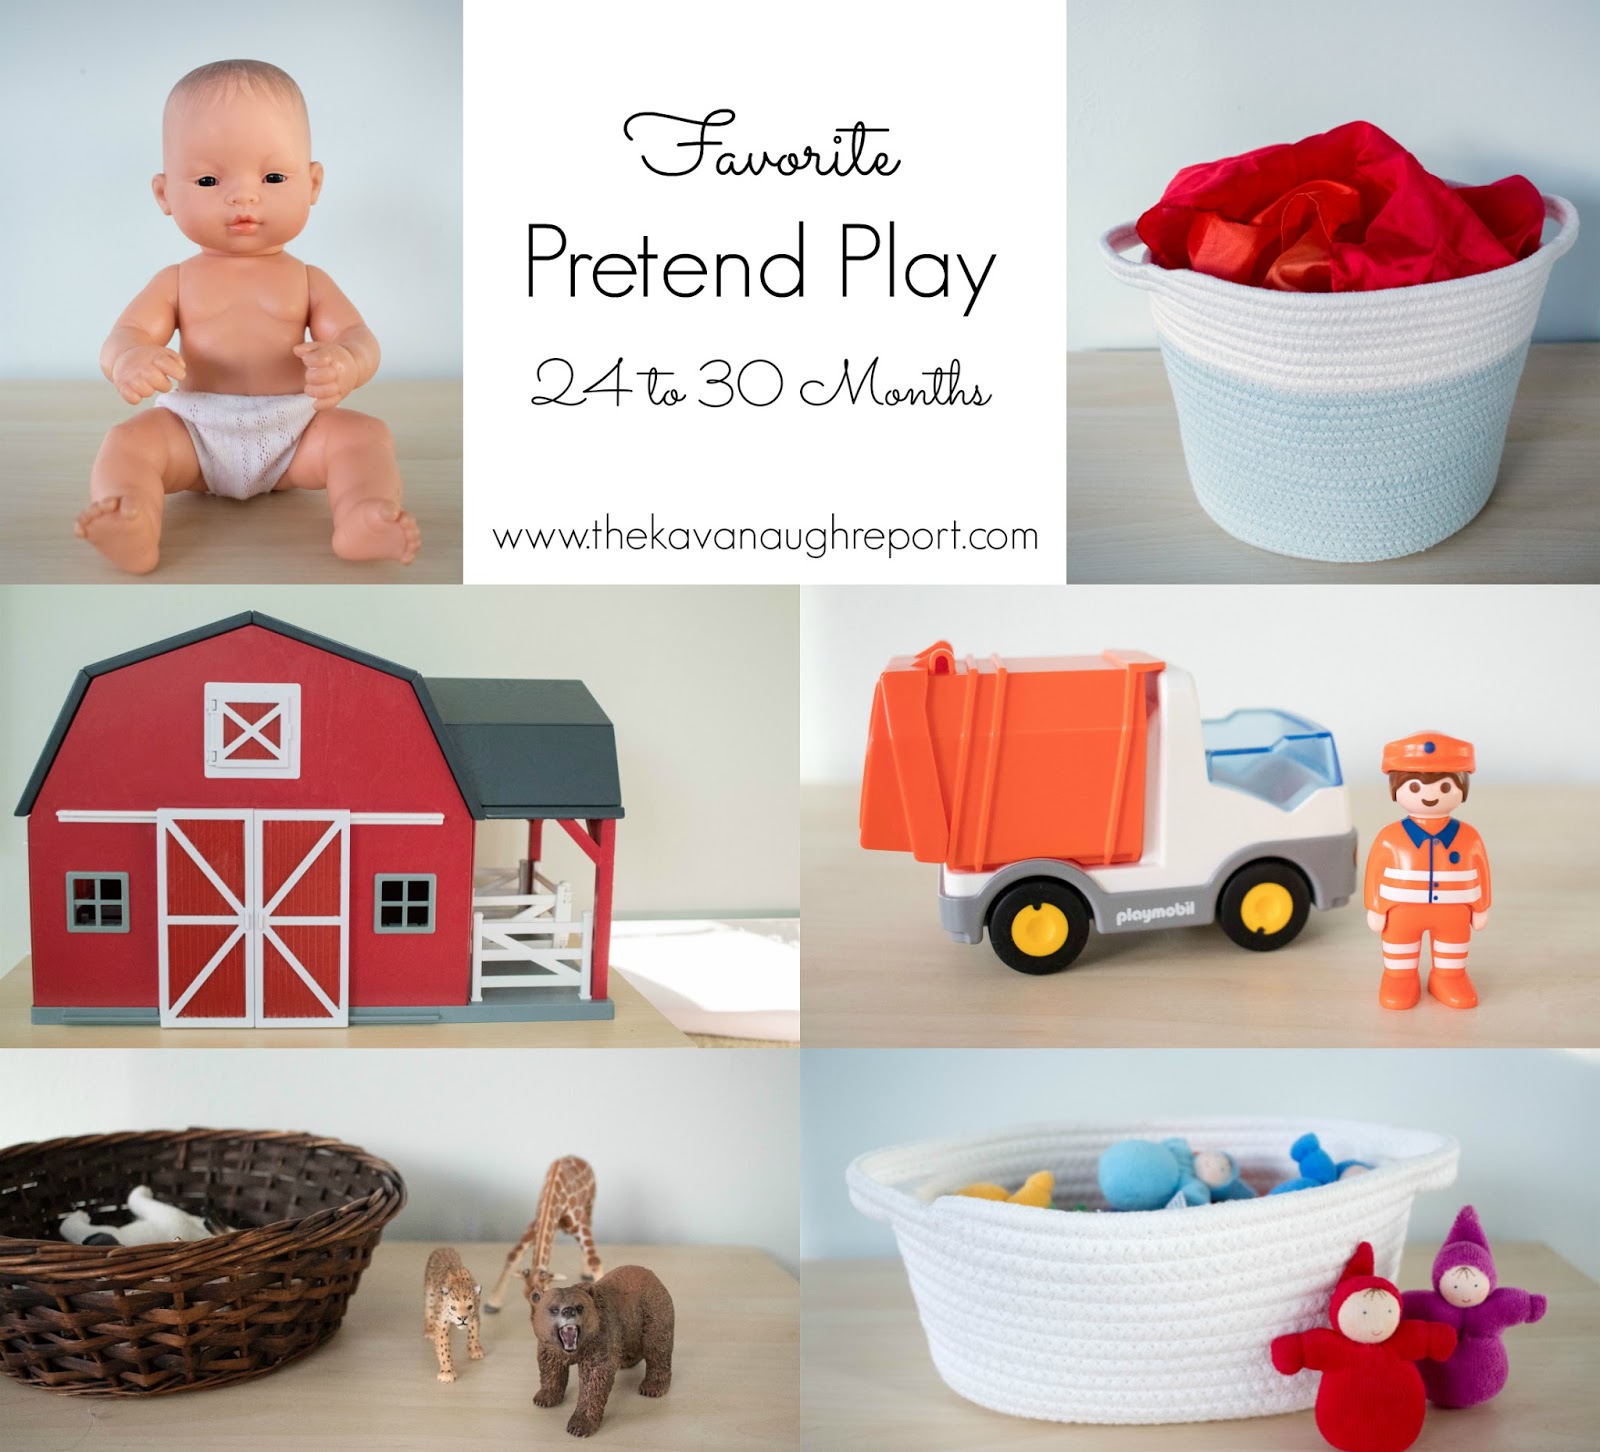 Here is a list of our favorite Montessori friendly toys between 24 and 30 months. These toys are perfect for 2-year-olds and other Montessori toddlers.